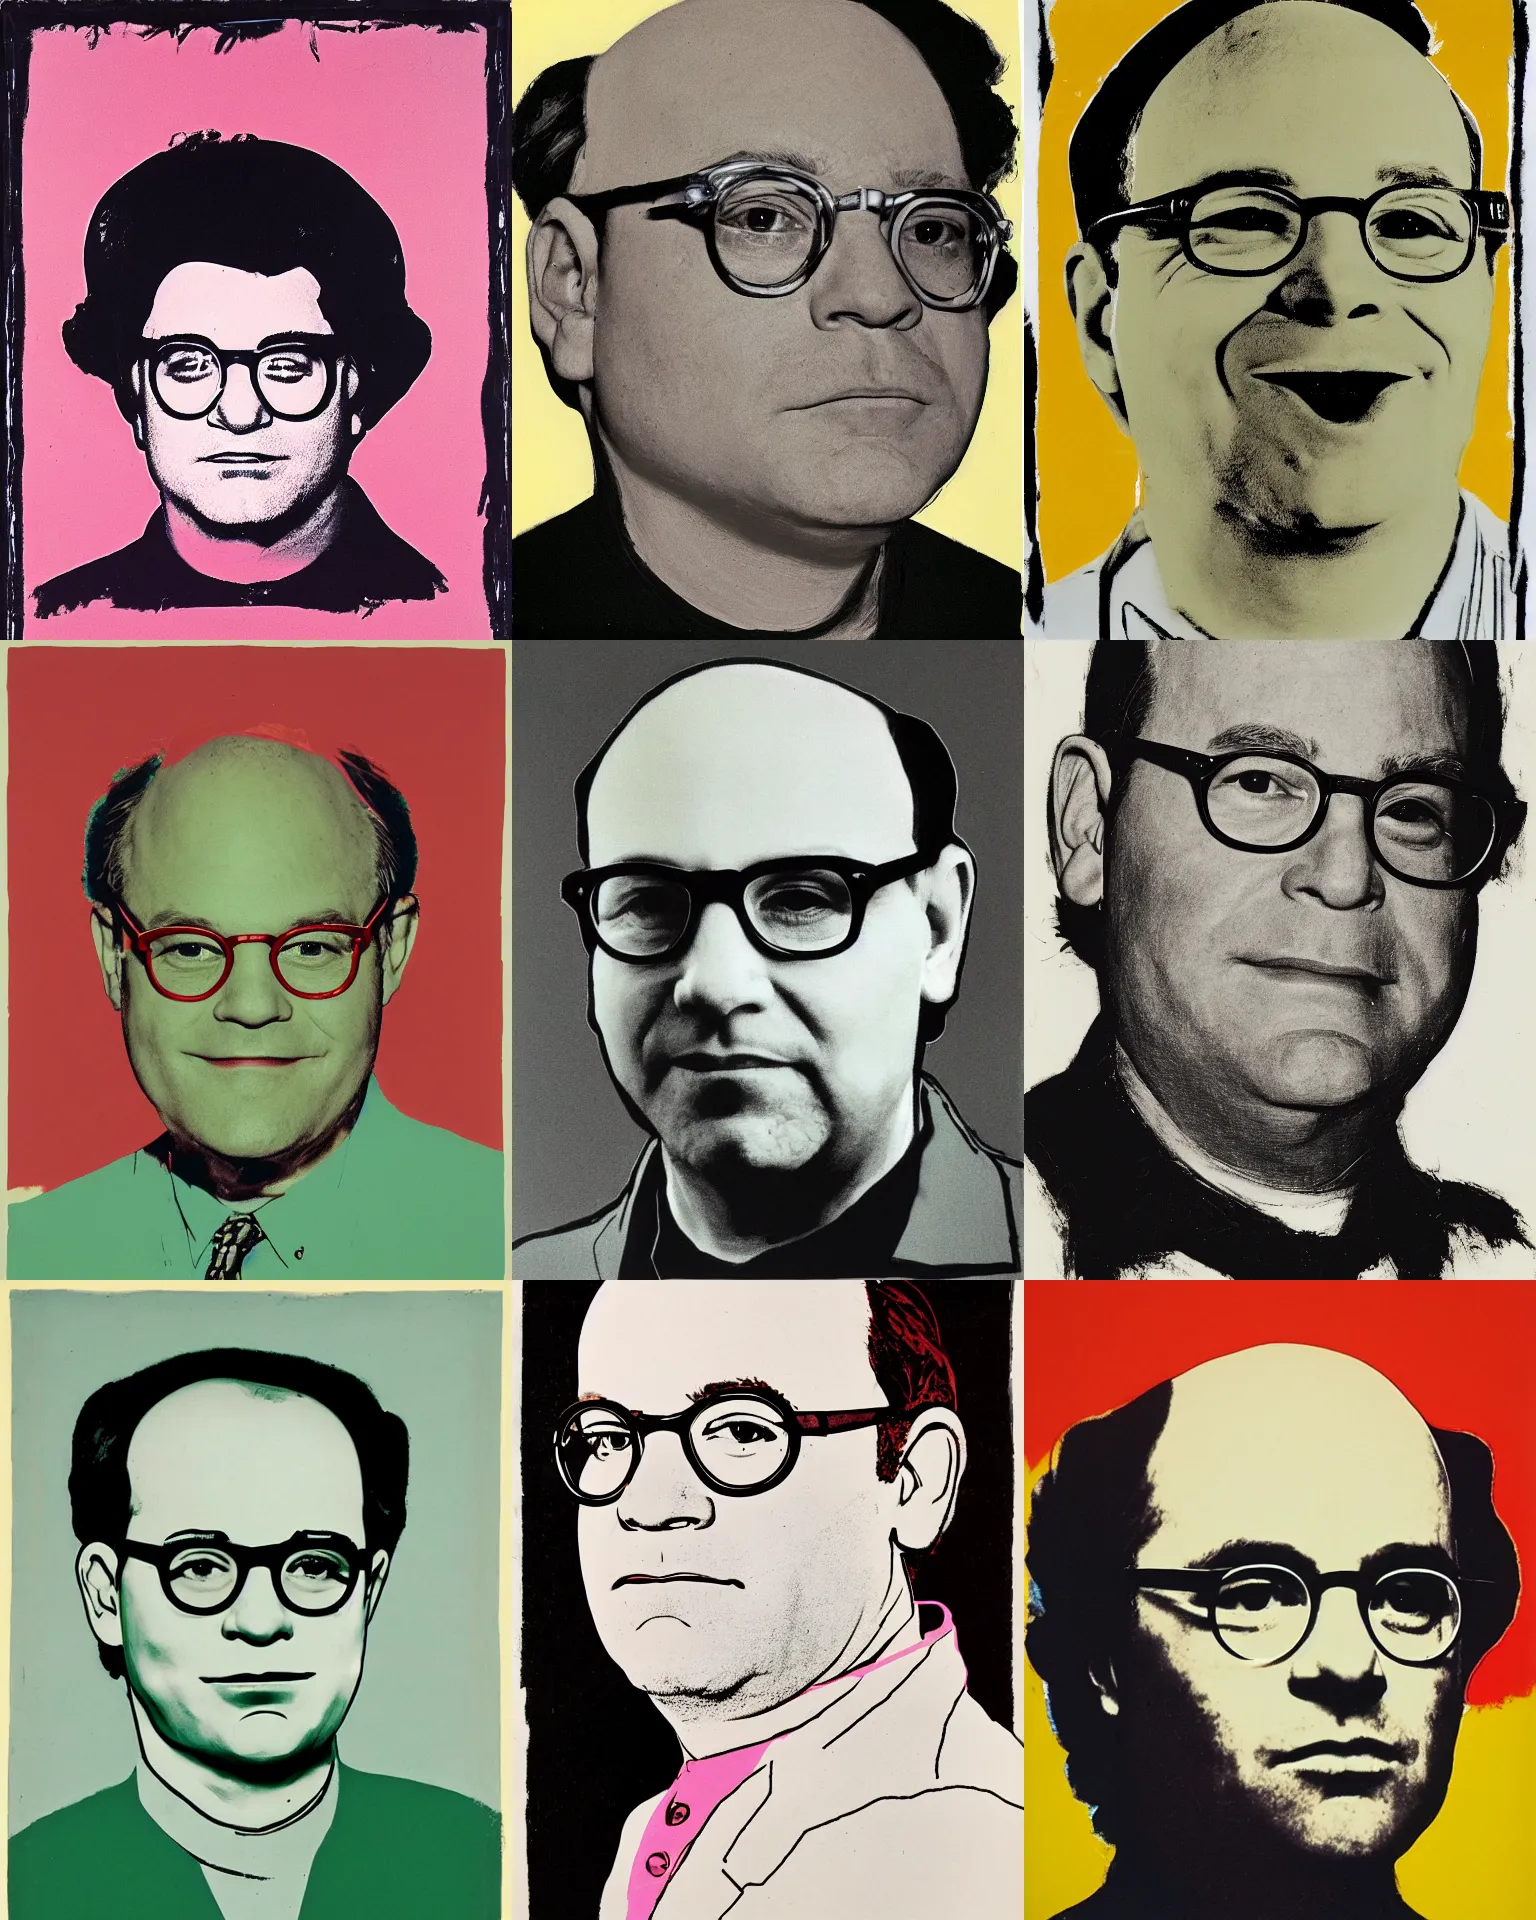 Prompt: A portrait of George Costanza, by Andy Warhol